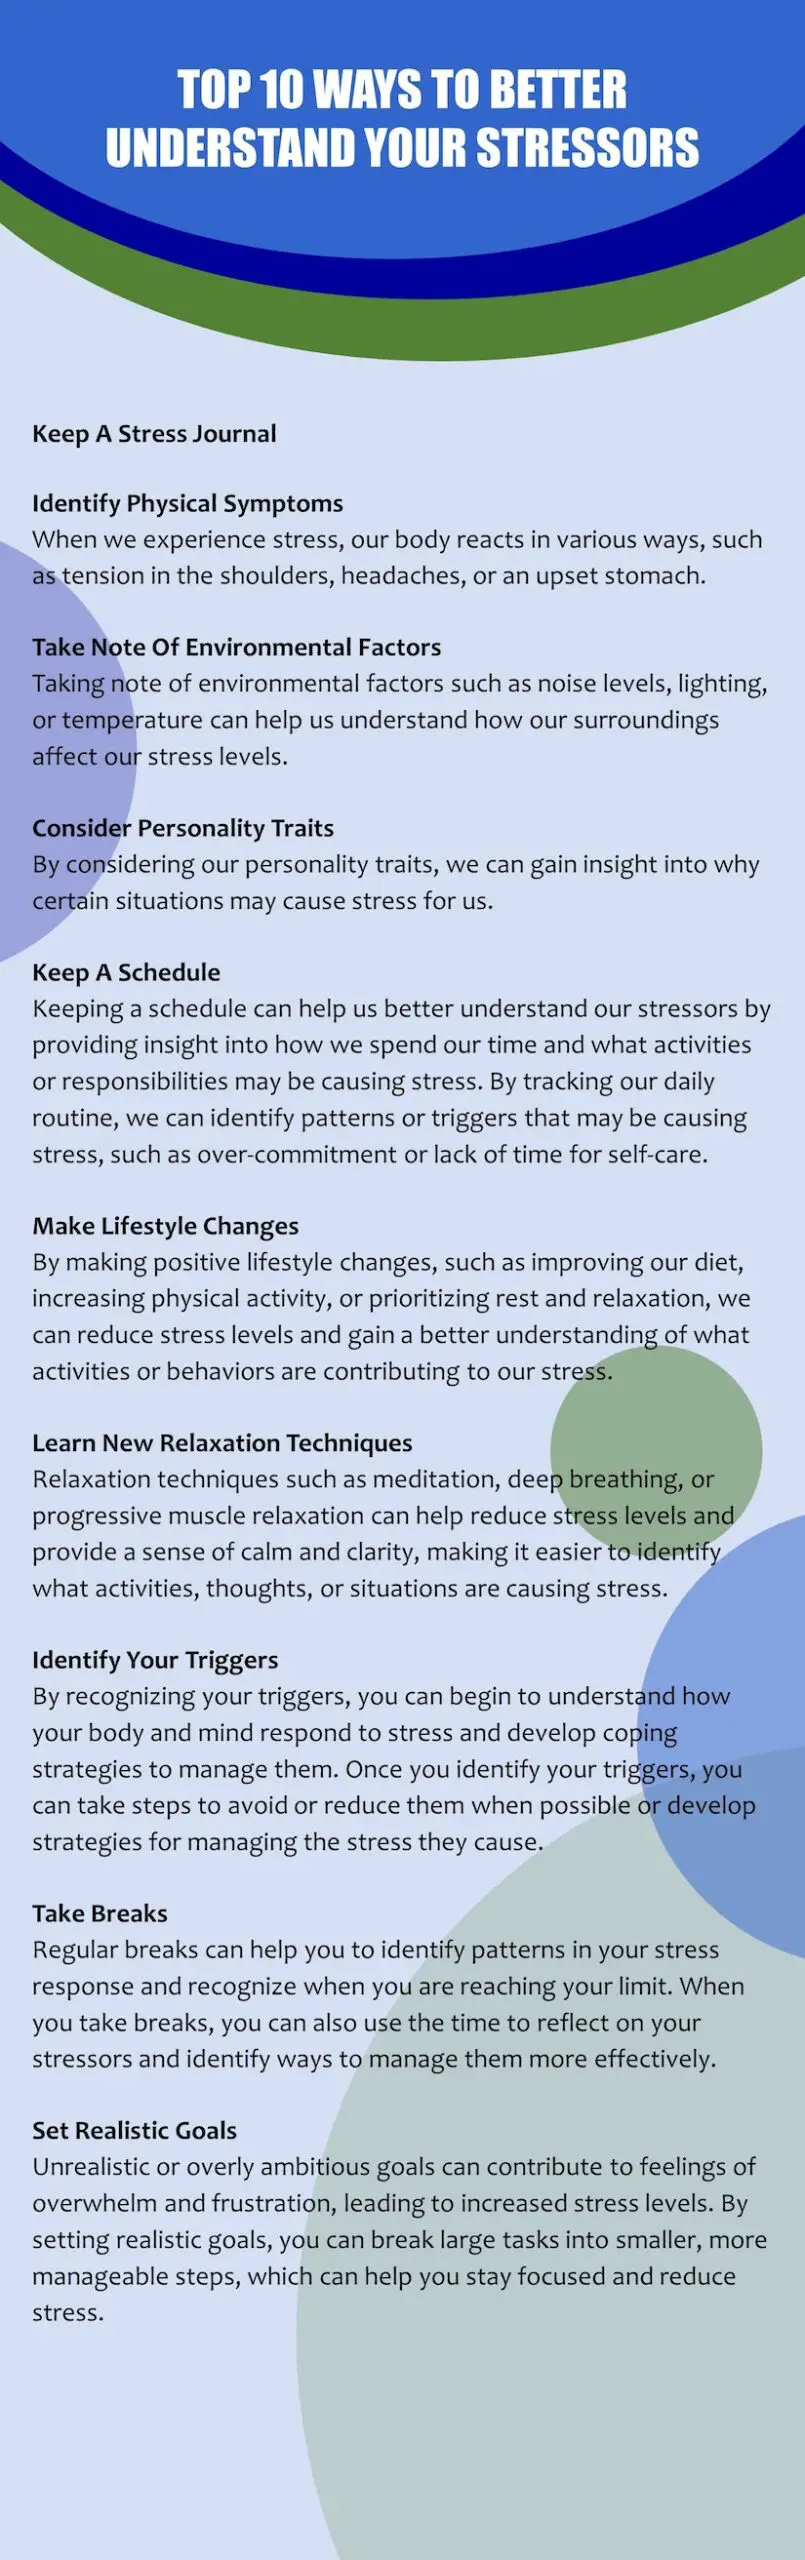 10 Ways to better understand your stressors.